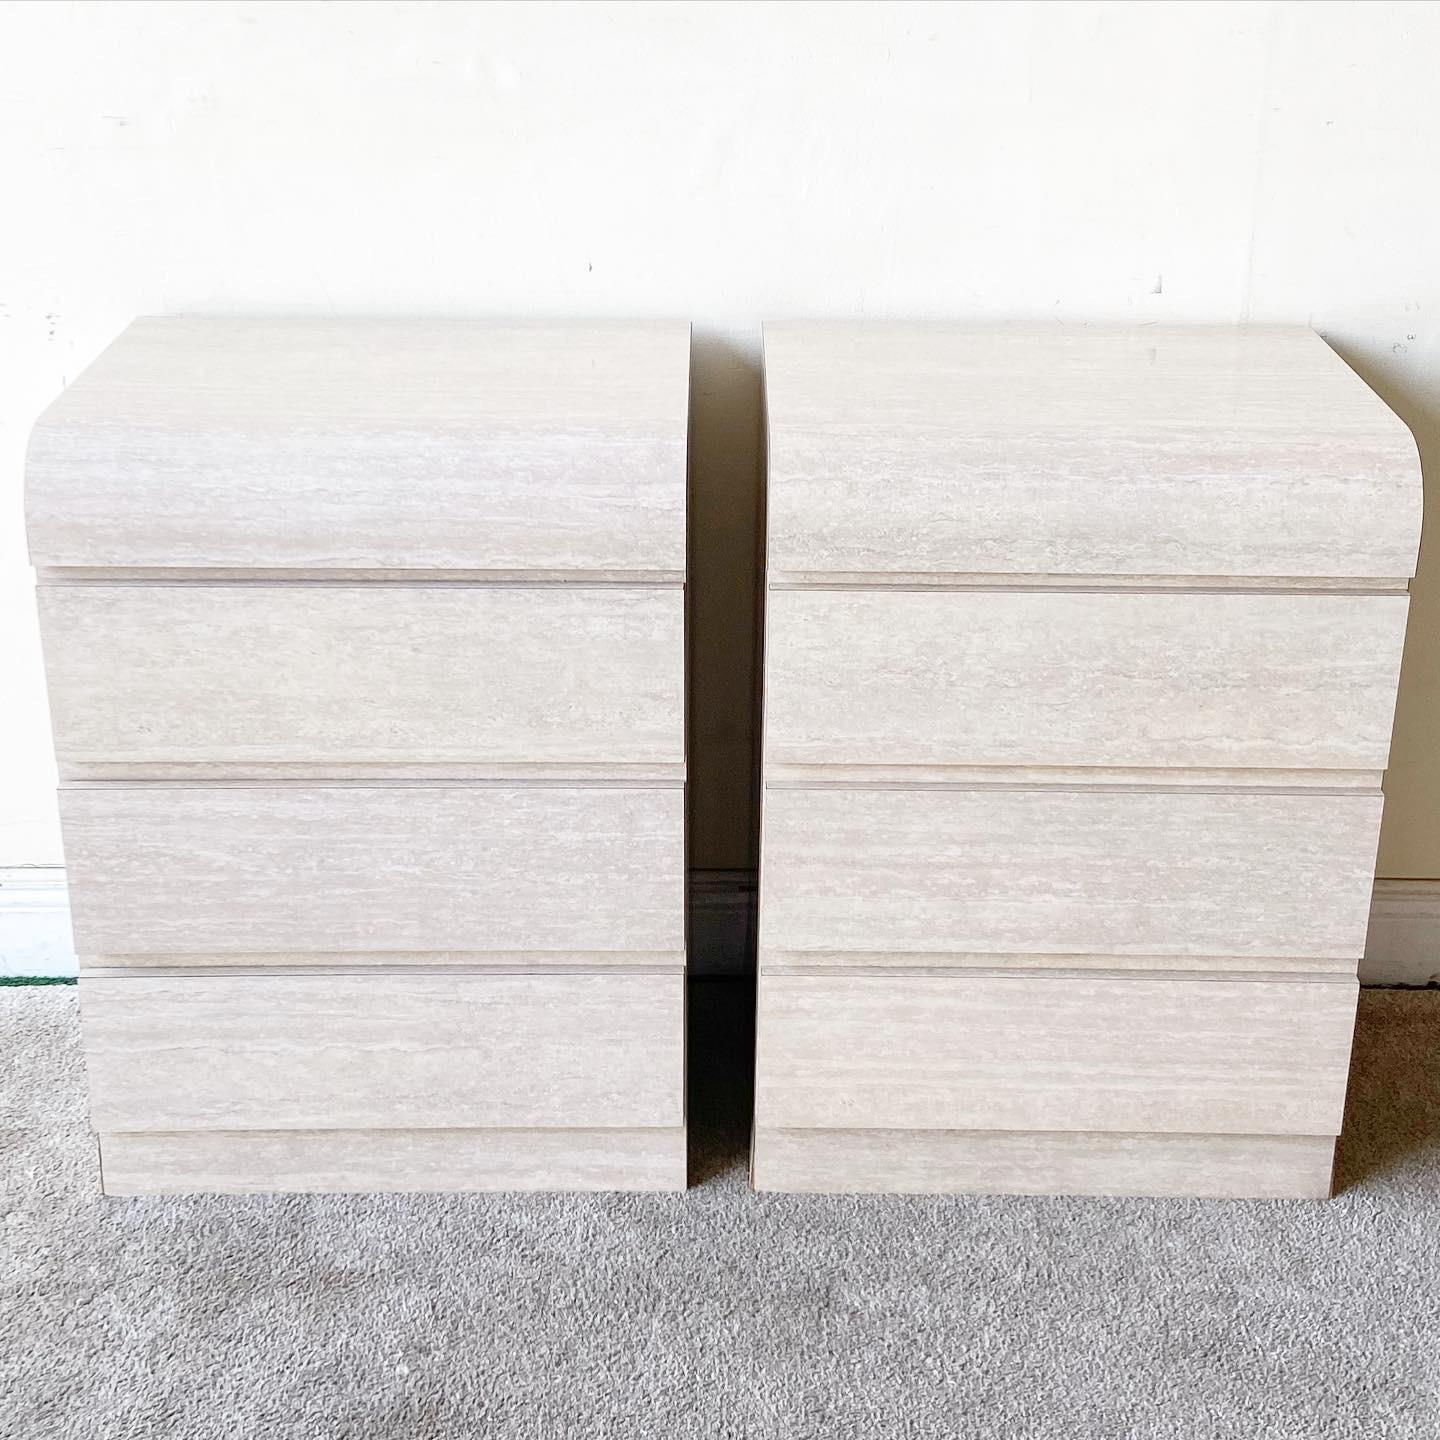 Amazing pair of postmodern waterfall nightstands. Each features 3 spacious drawers and a faux travertine laminate.